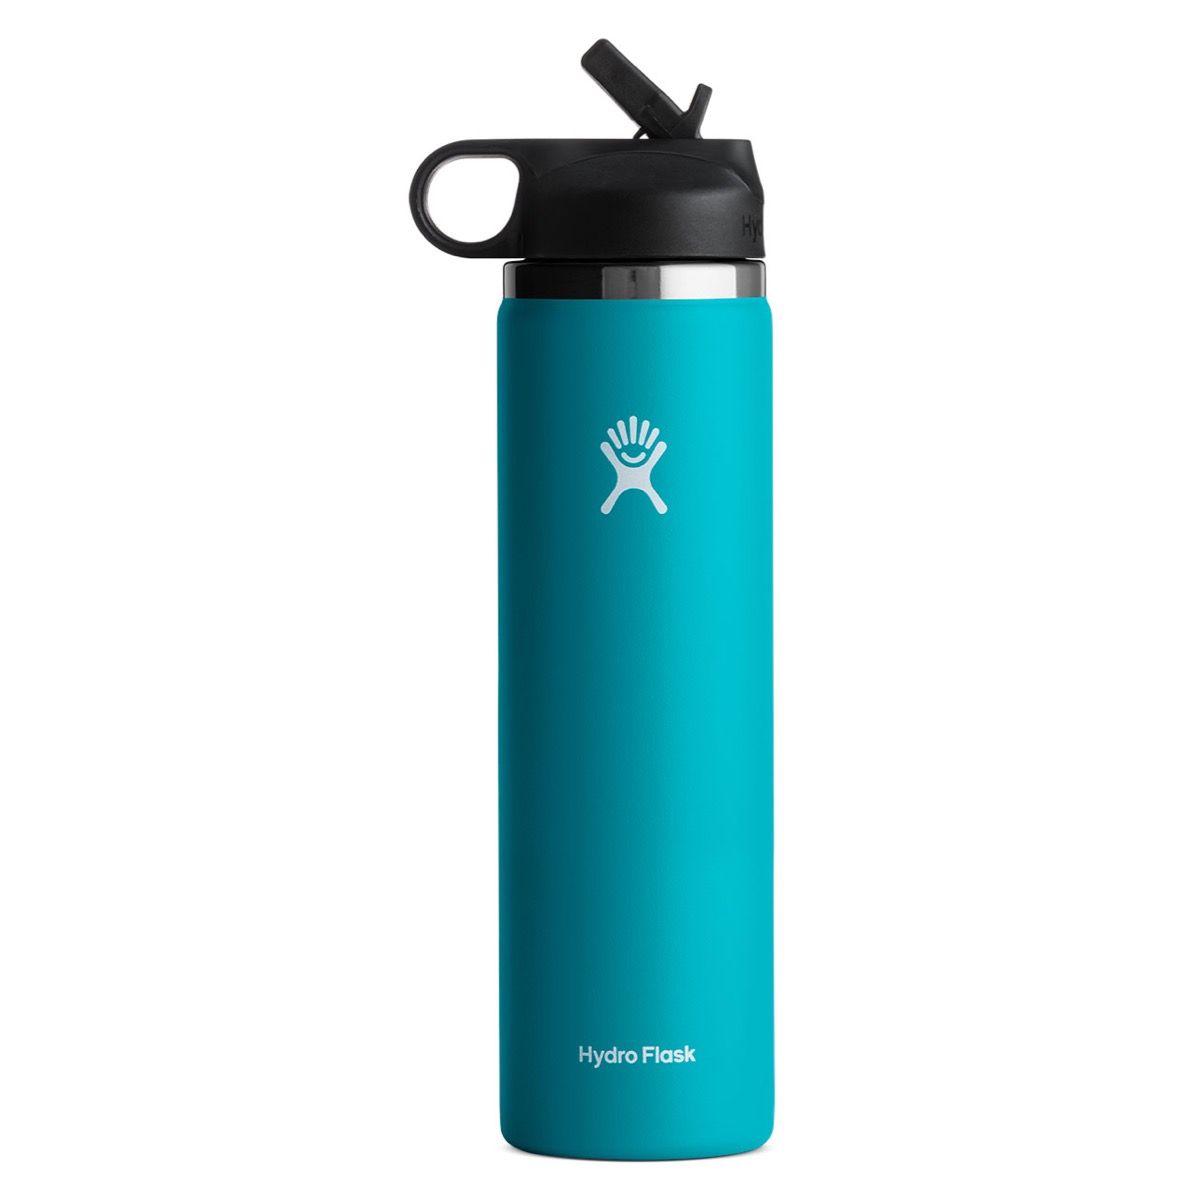 24 Oz Narrow Mouth Water Bottle with Spout Lid – Iron Flask